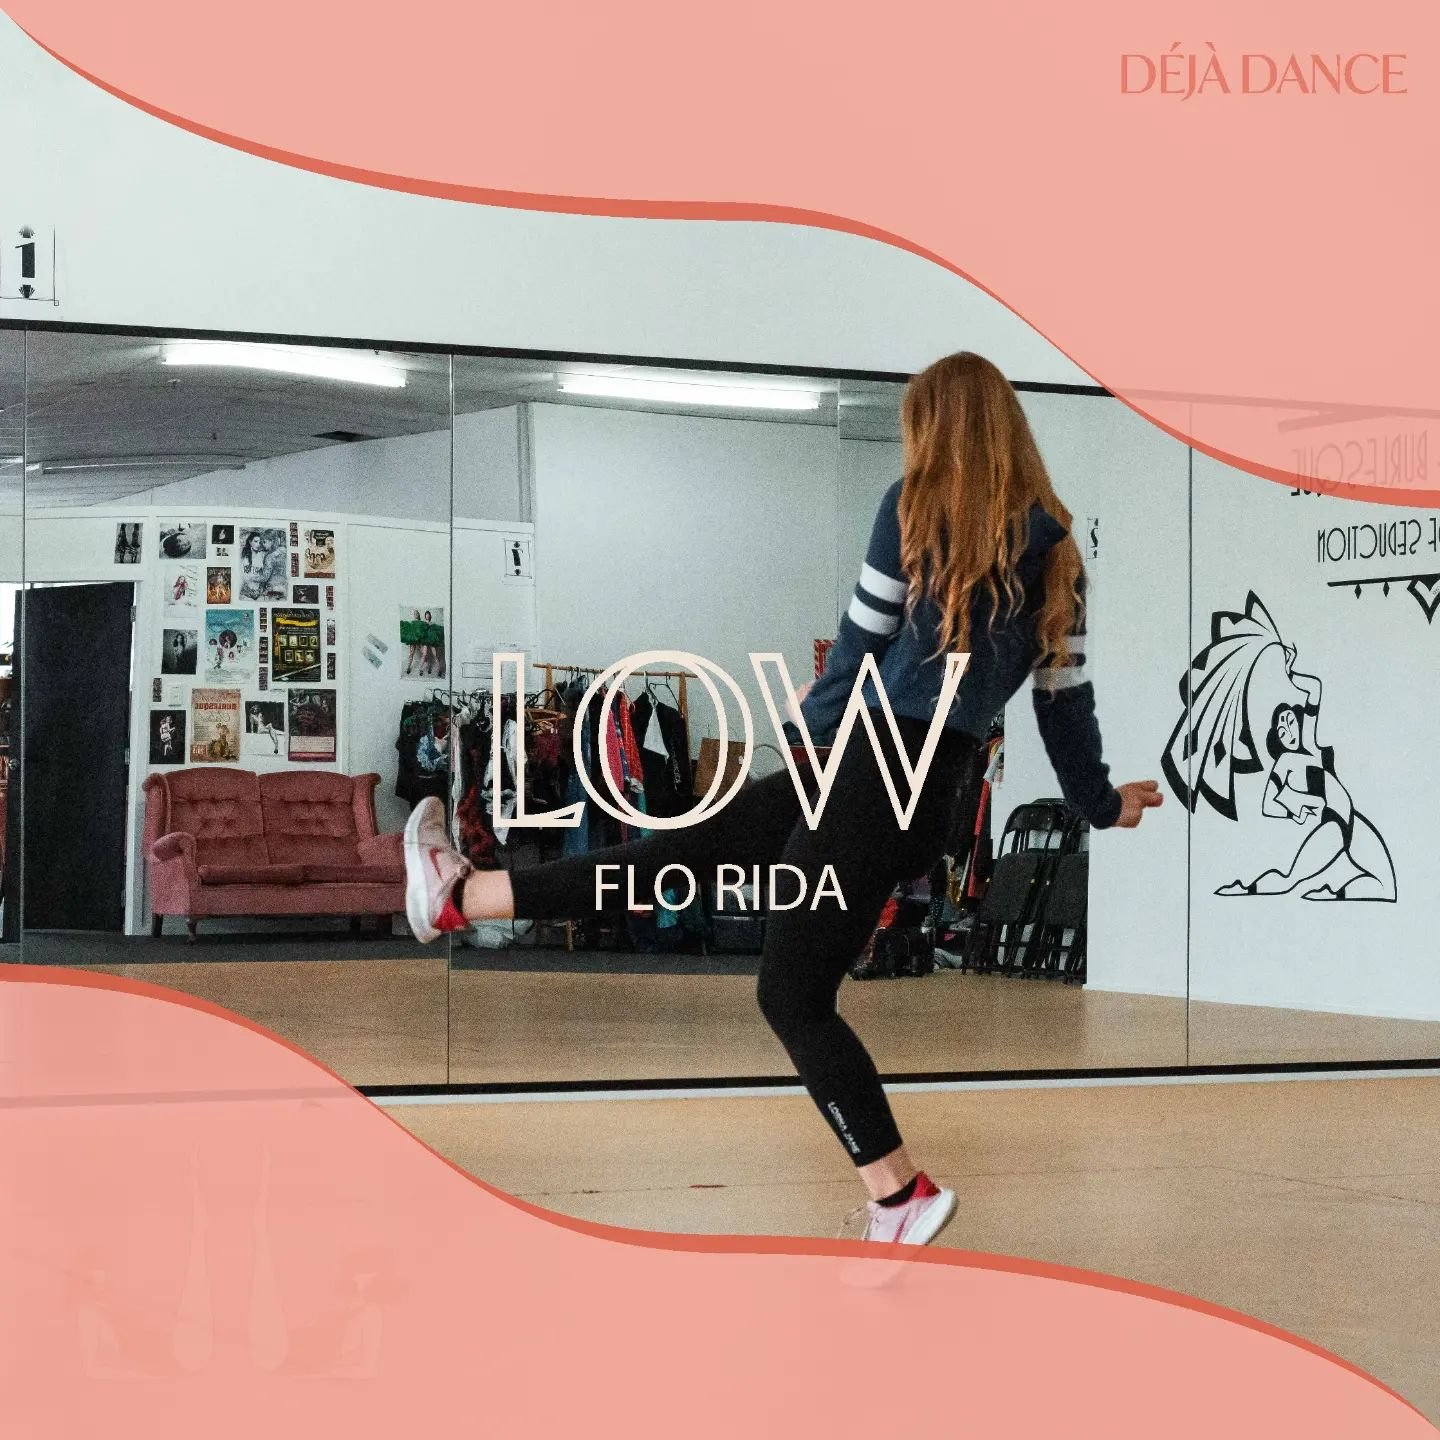 We've got a throwback this week, we're dancing hip hop to &quot;Low&quot; by Flo Rida! Come join us! 

If any of our song choices aren't your vibe, feel free to send us your recommendations. Every week is chosen from our list of suggestions, so yours